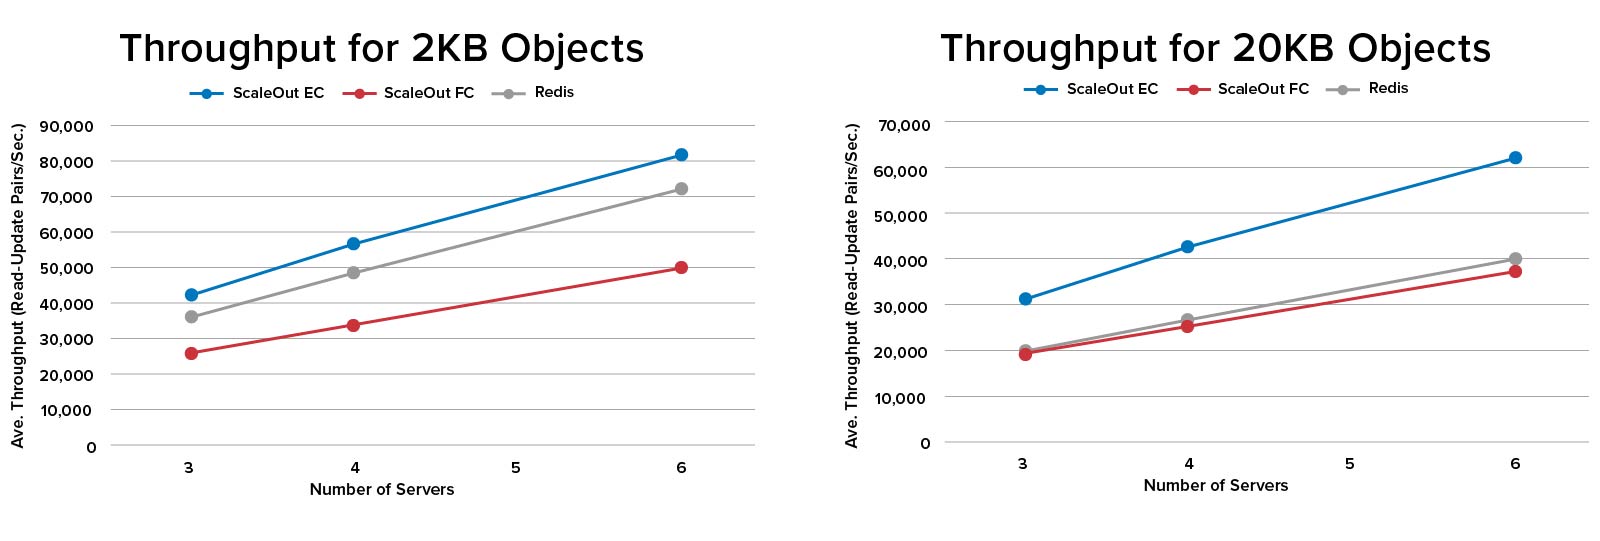 ScaleOut's distributed caching throughput is consistently higher than Redis.